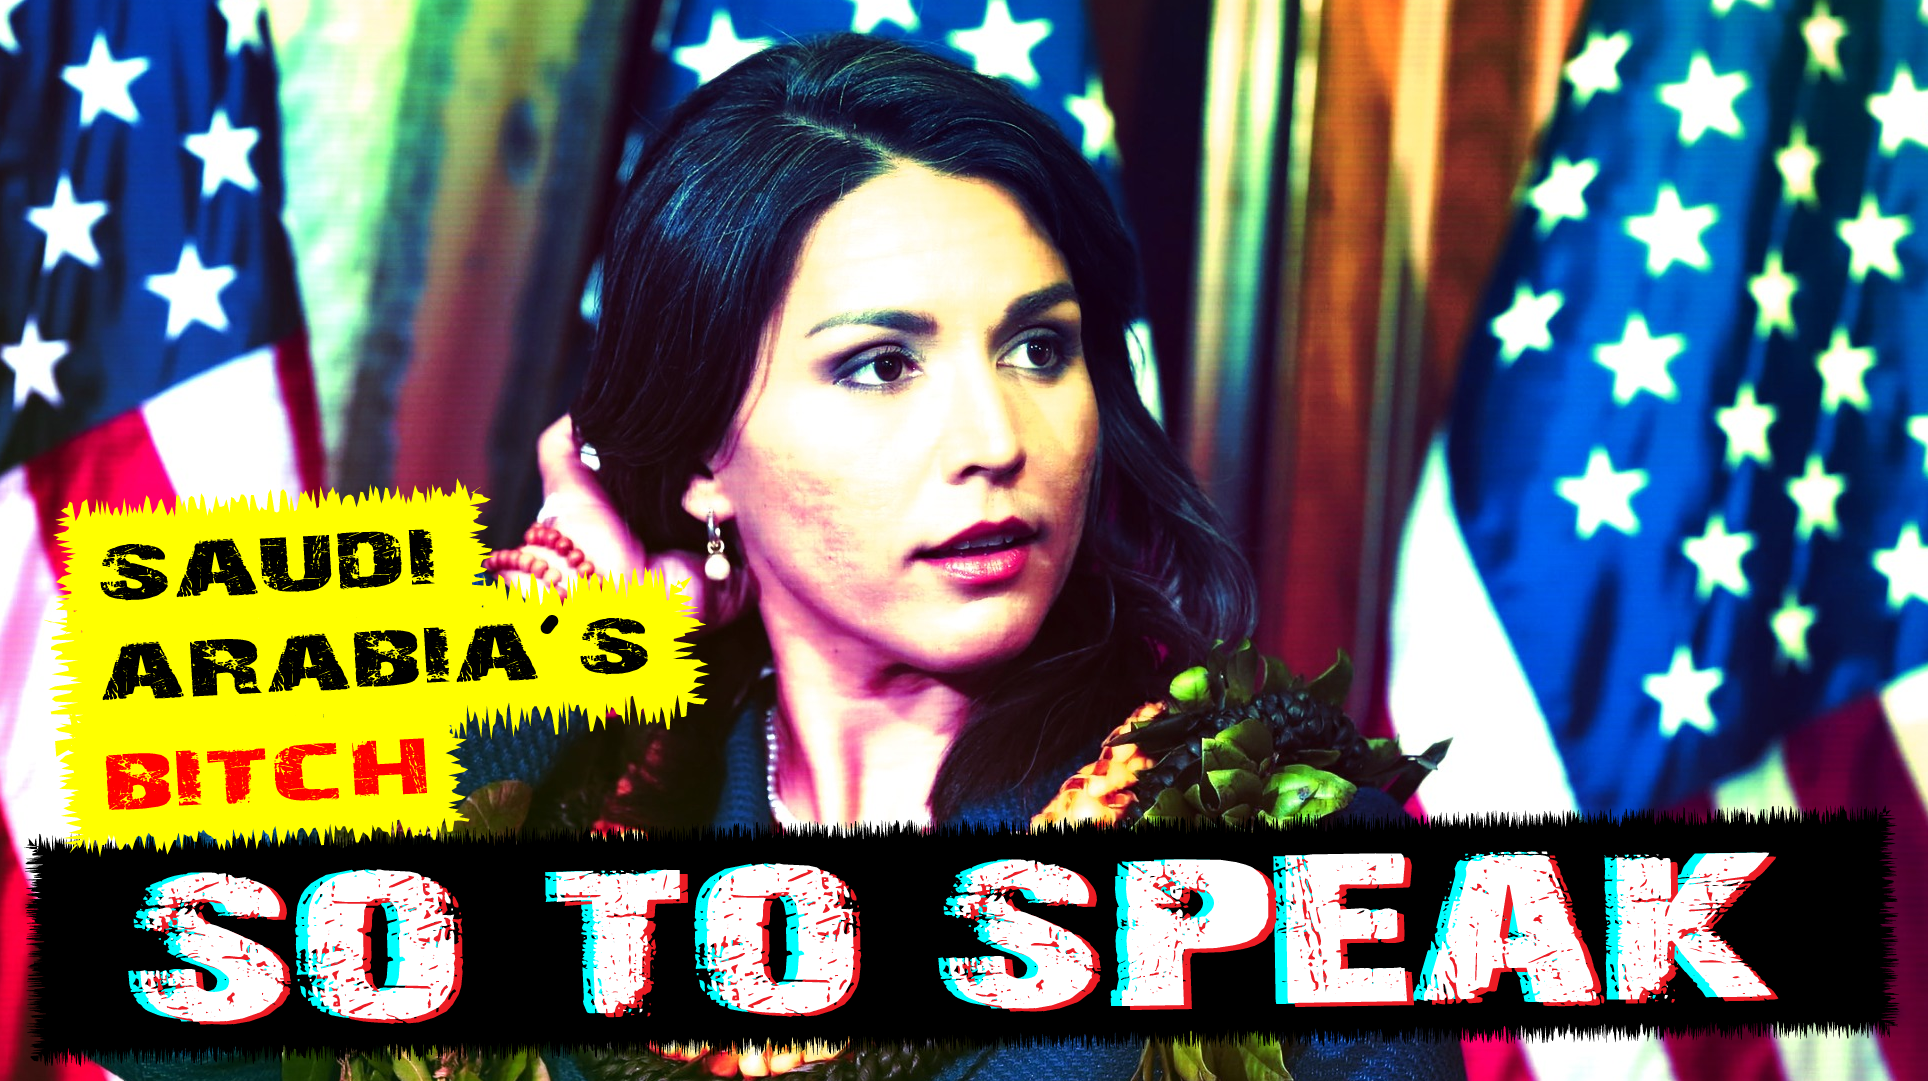 Mommy Tulsi Gabbard calls out Trump for using the American military as Israel's bitch